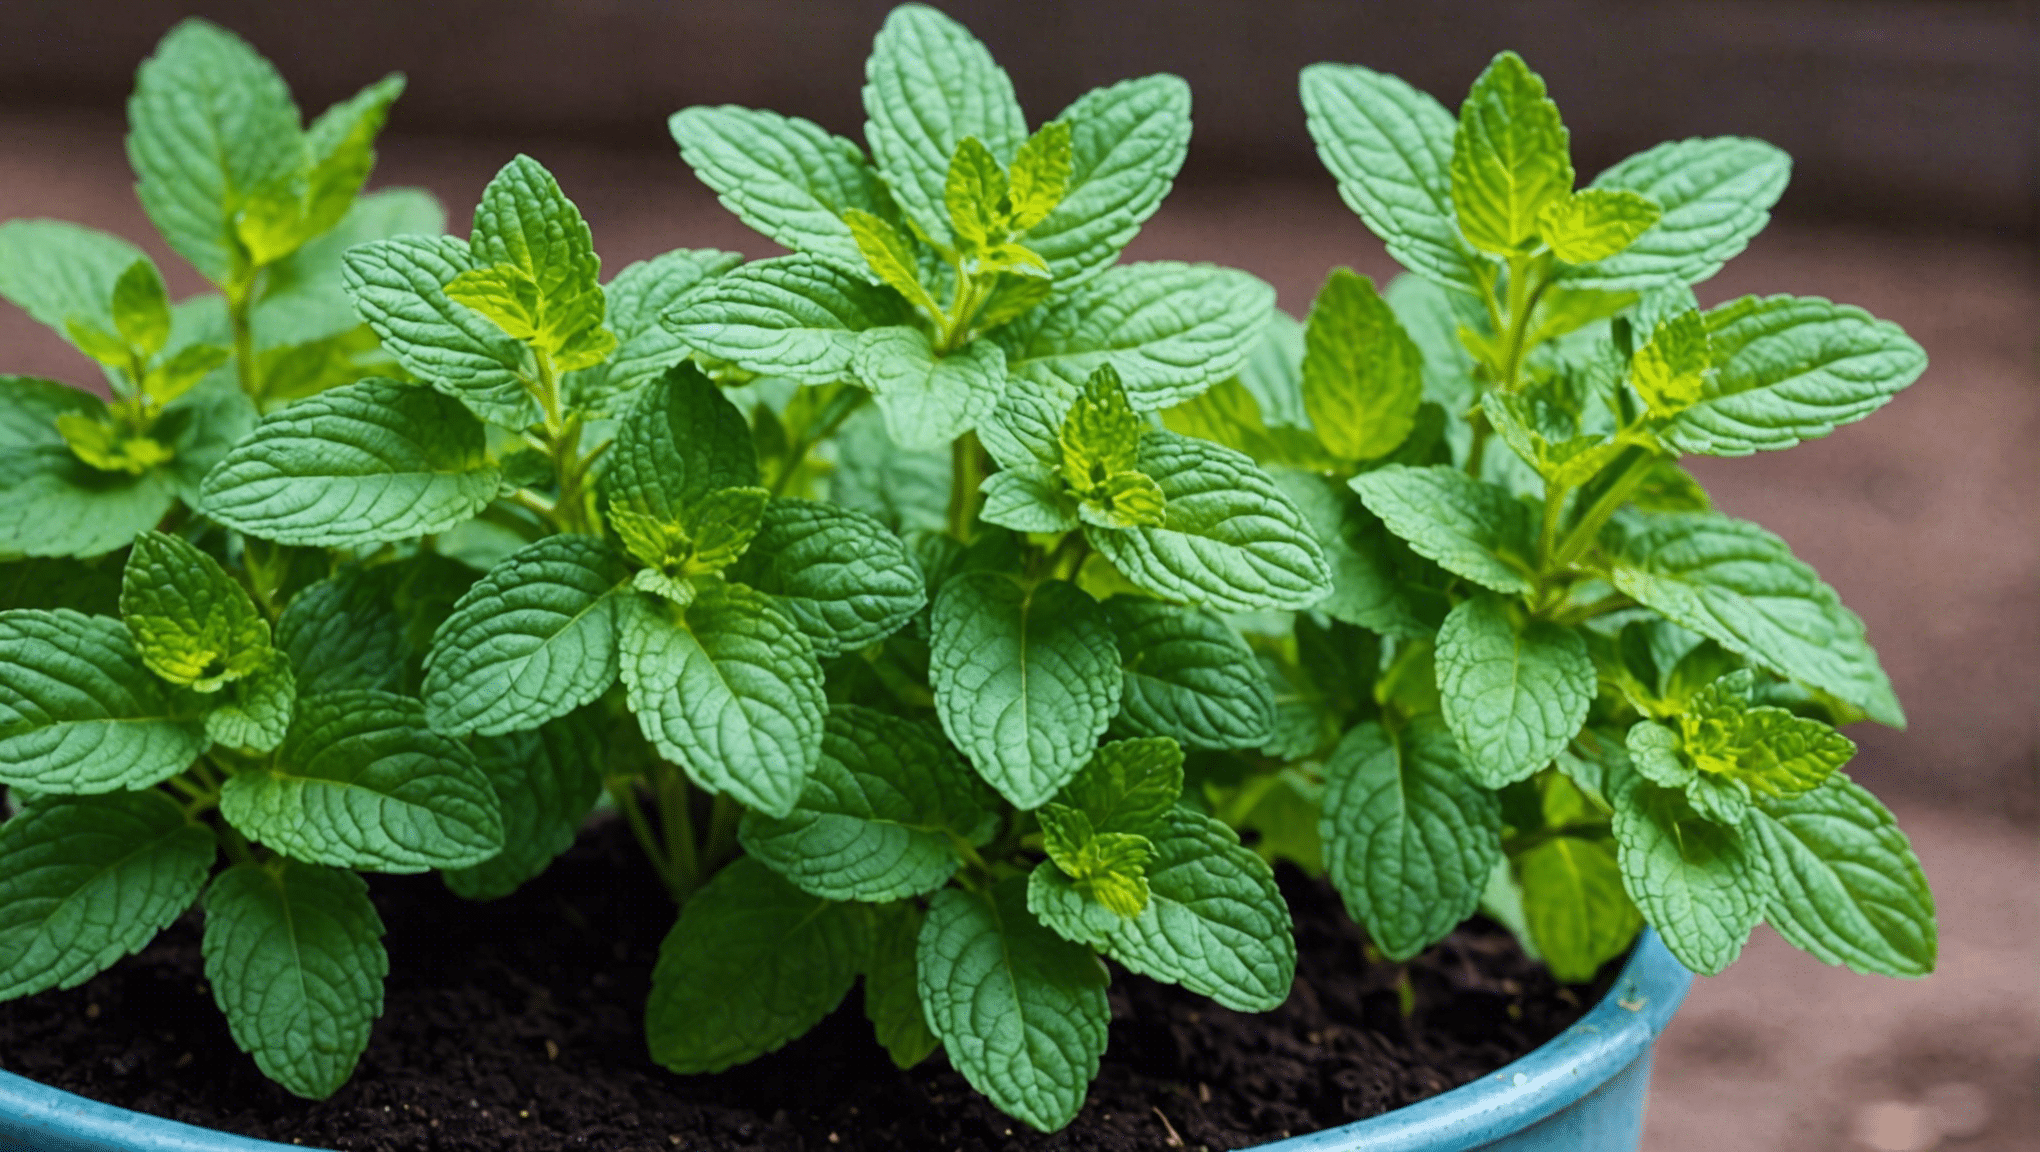 discover how to easily grow mint seeds with our helpful guide. learn all you need to know to successfully cultivate your own mint plants at home.